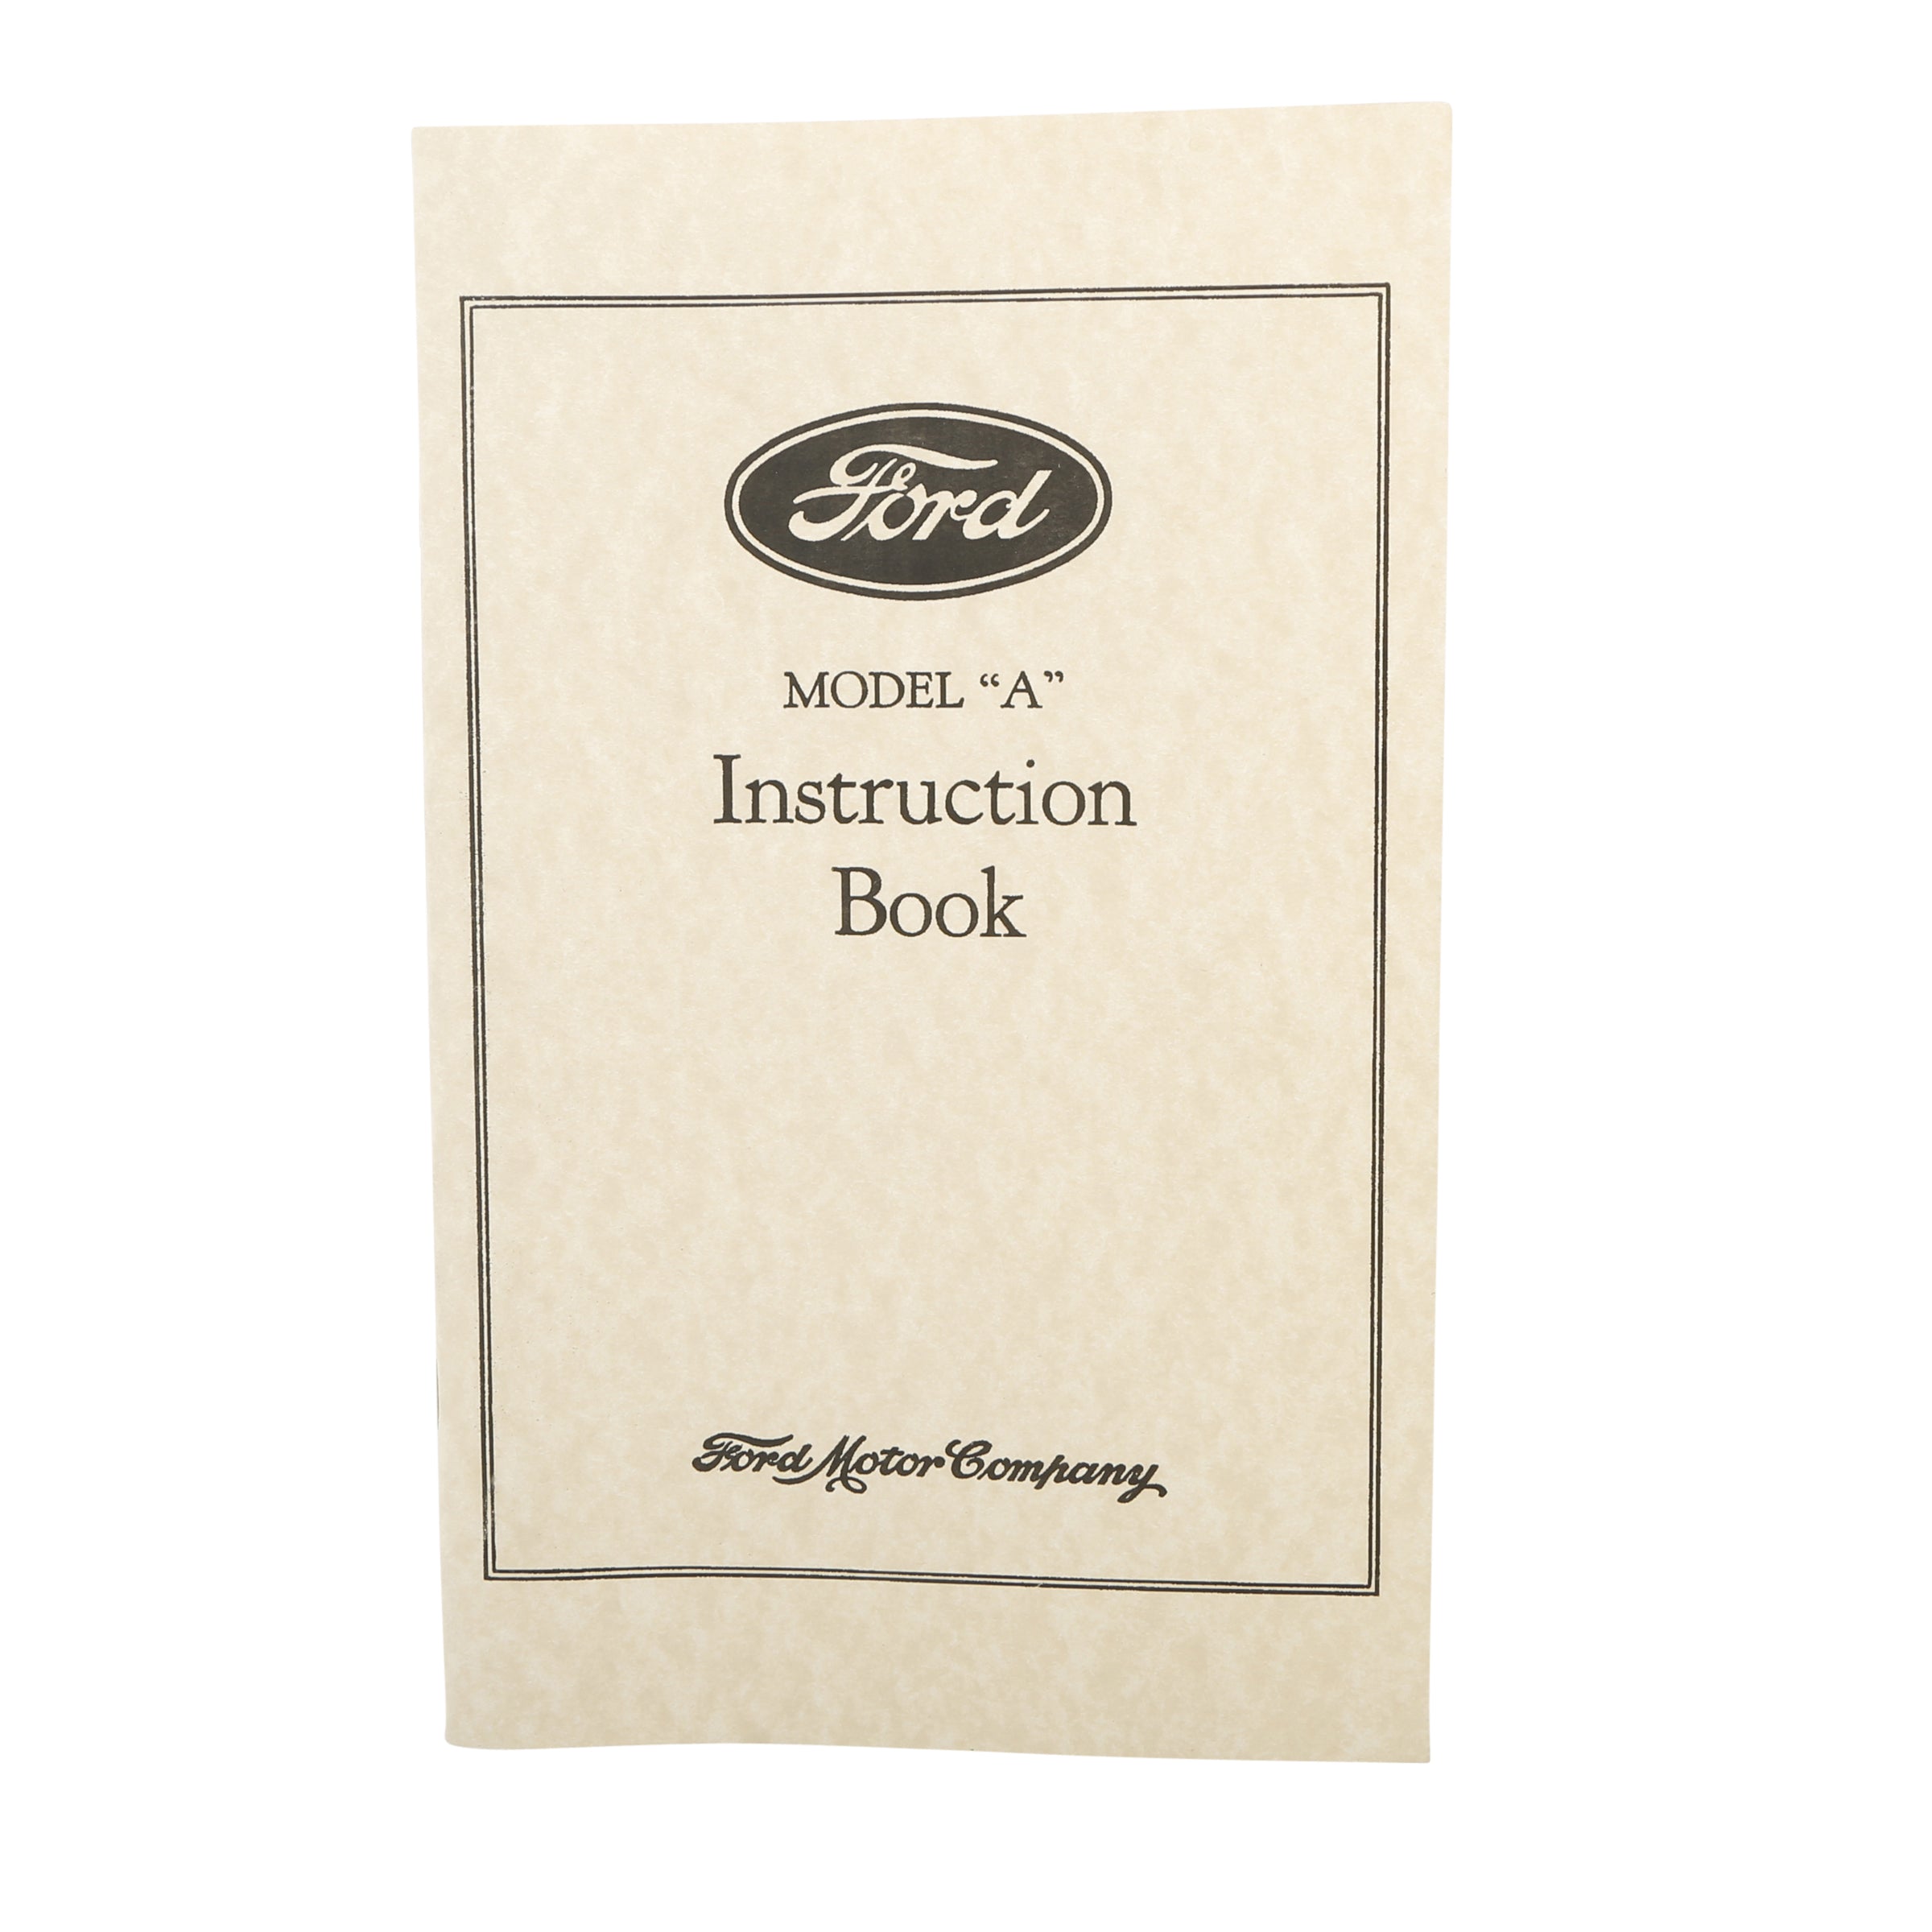 Model A Ford Instruction Book • 1929